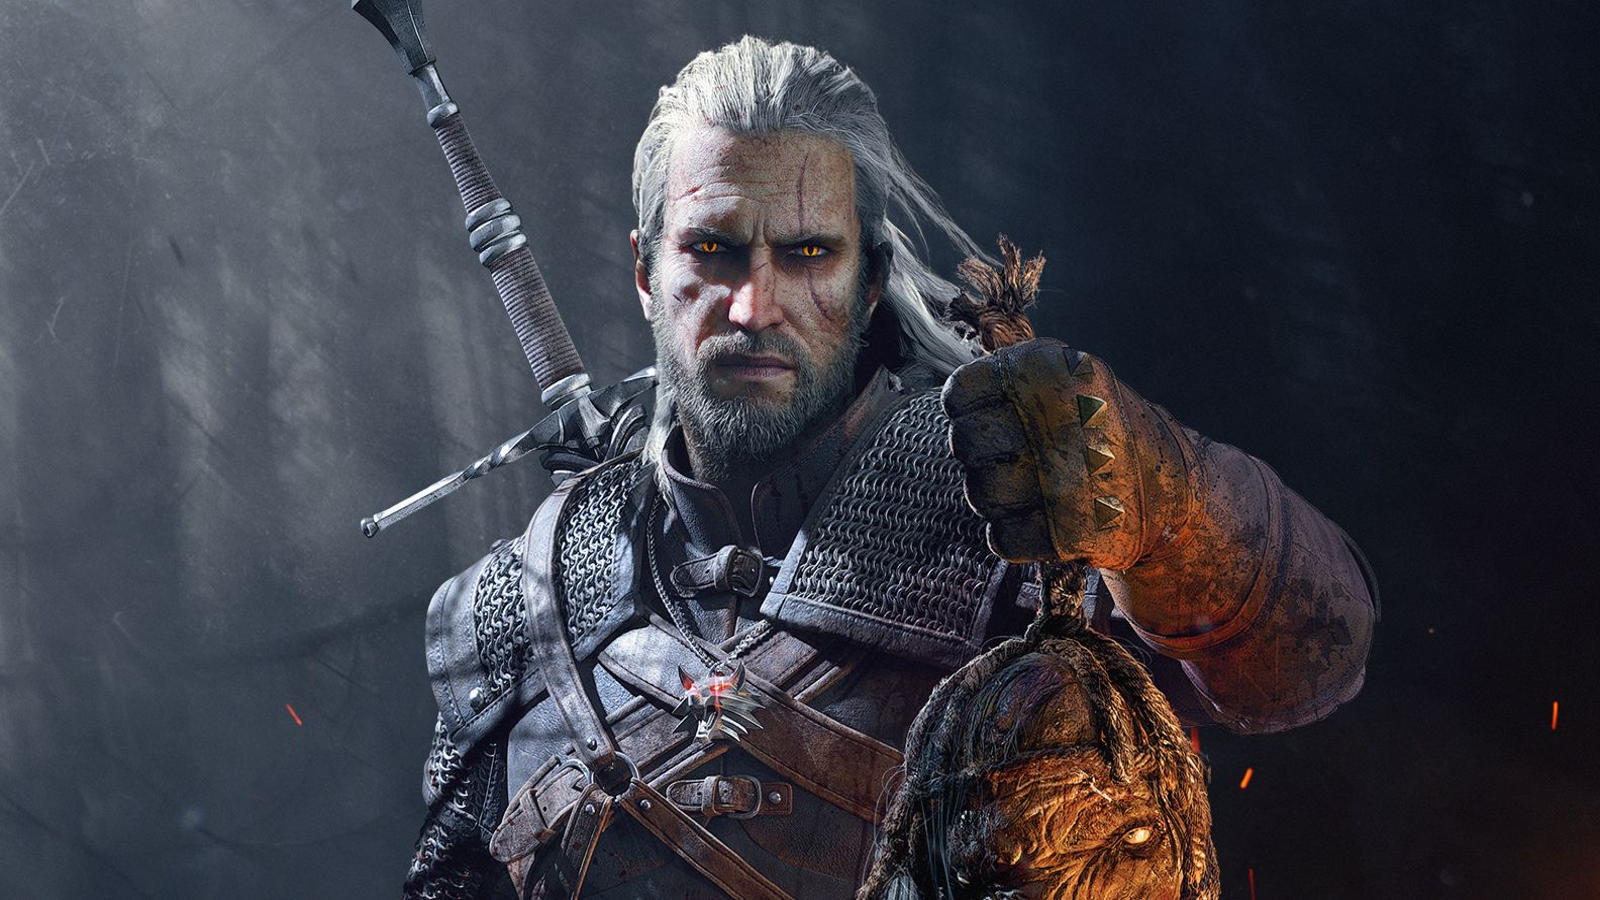 The Witcher 3: Wild Hunt is coming to PS5 and Xbox Series X